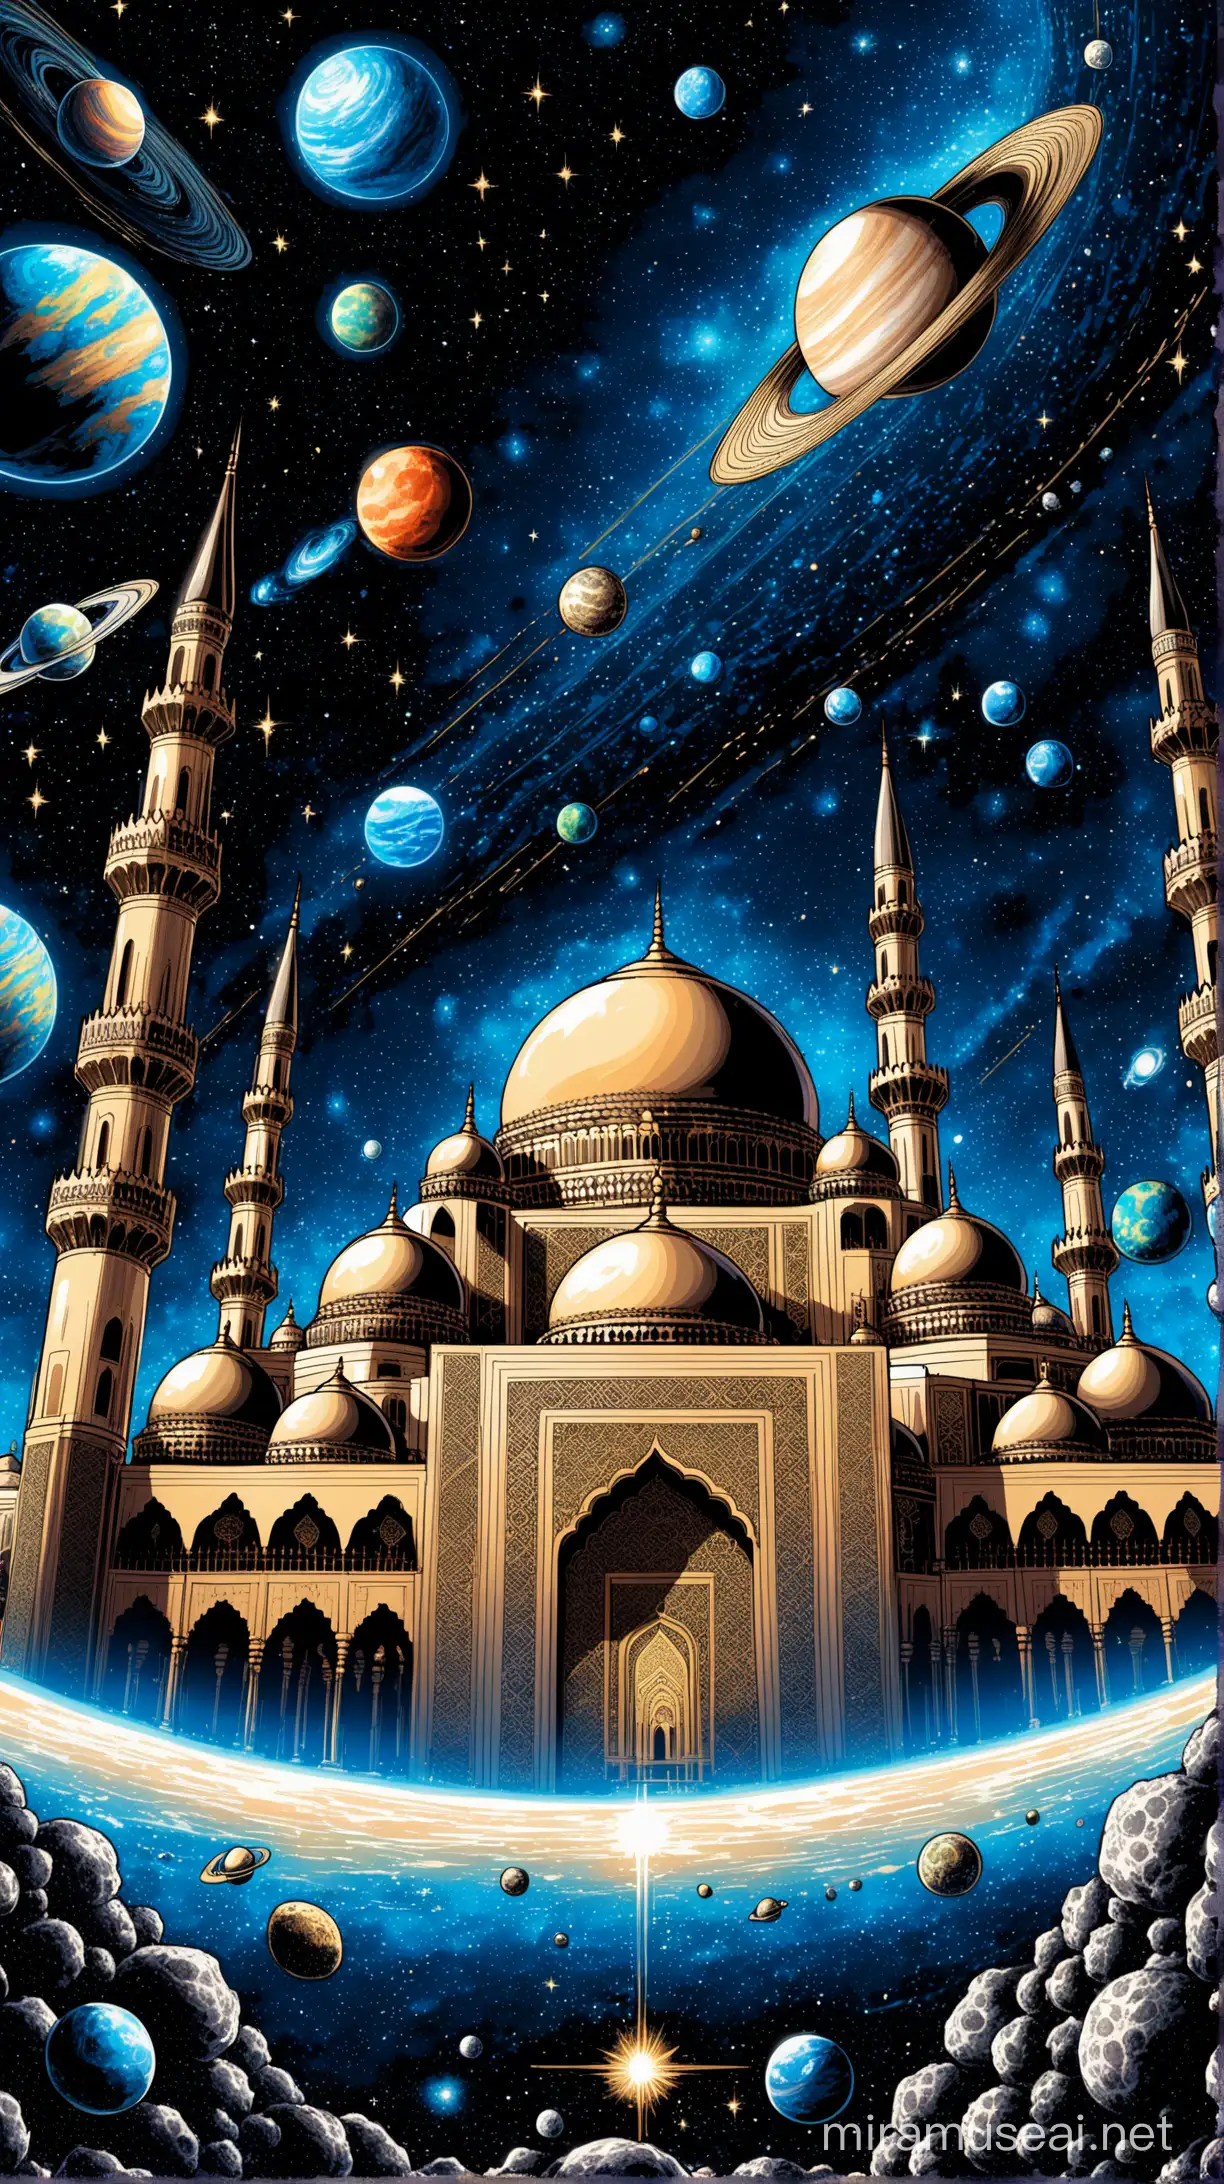 A striking (((drawing))) featuring a ((mosque)) intricate details and ornate patterns interwoven with (((asteroids))) and ((planets)) reflecting a cosmic splendor